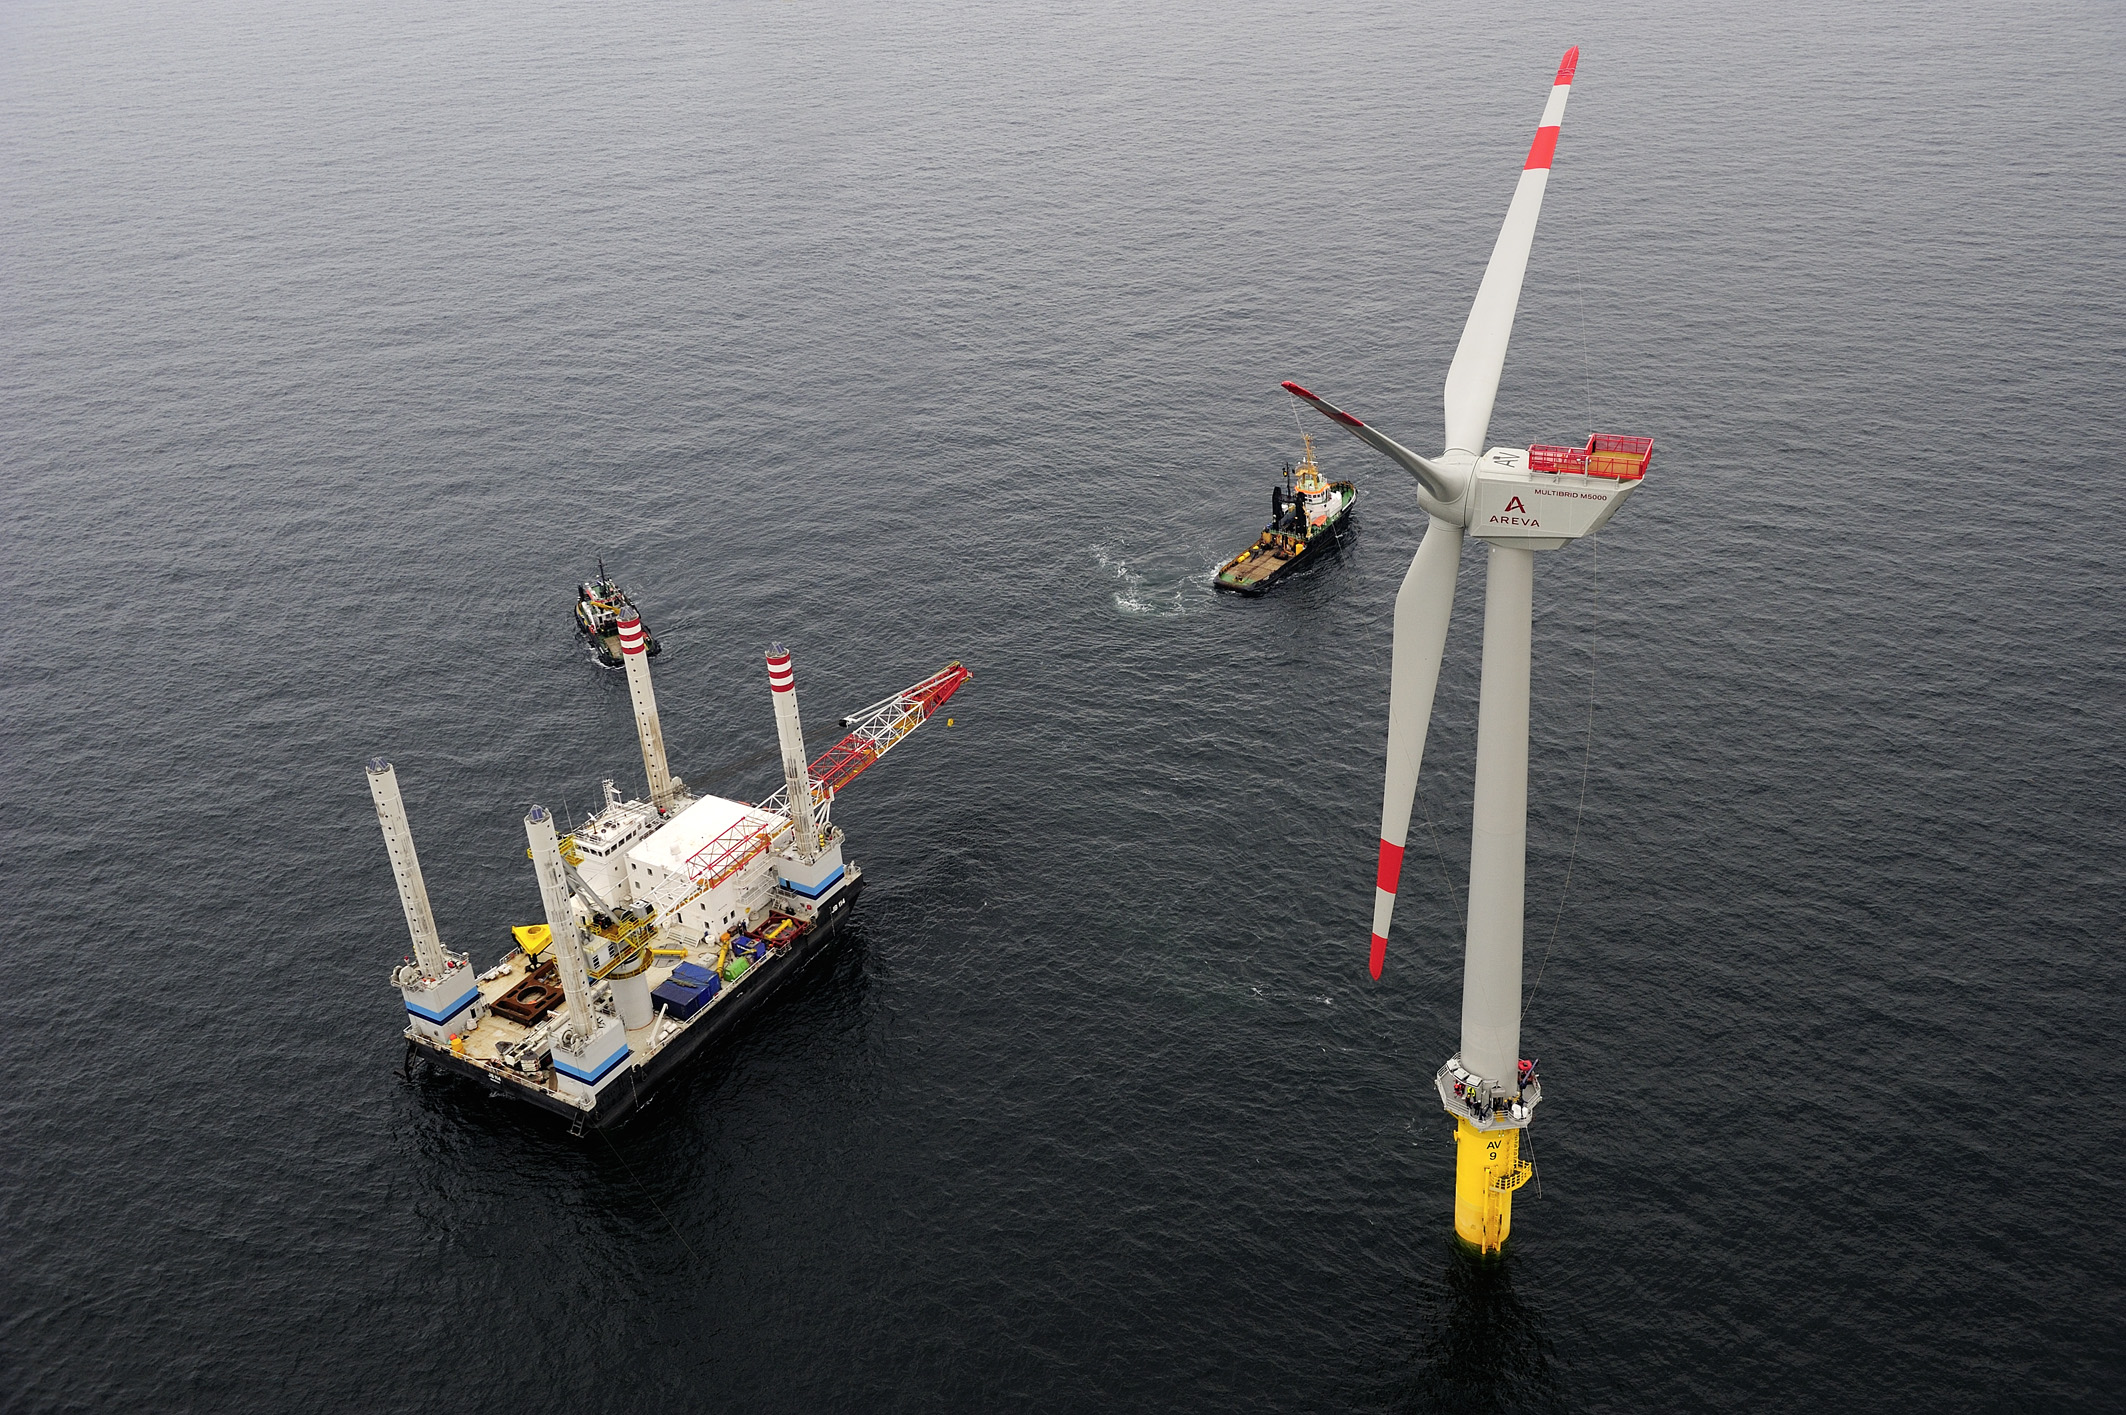 Maritime Industry Also Relies on Offshore Wind Energy (Germany)